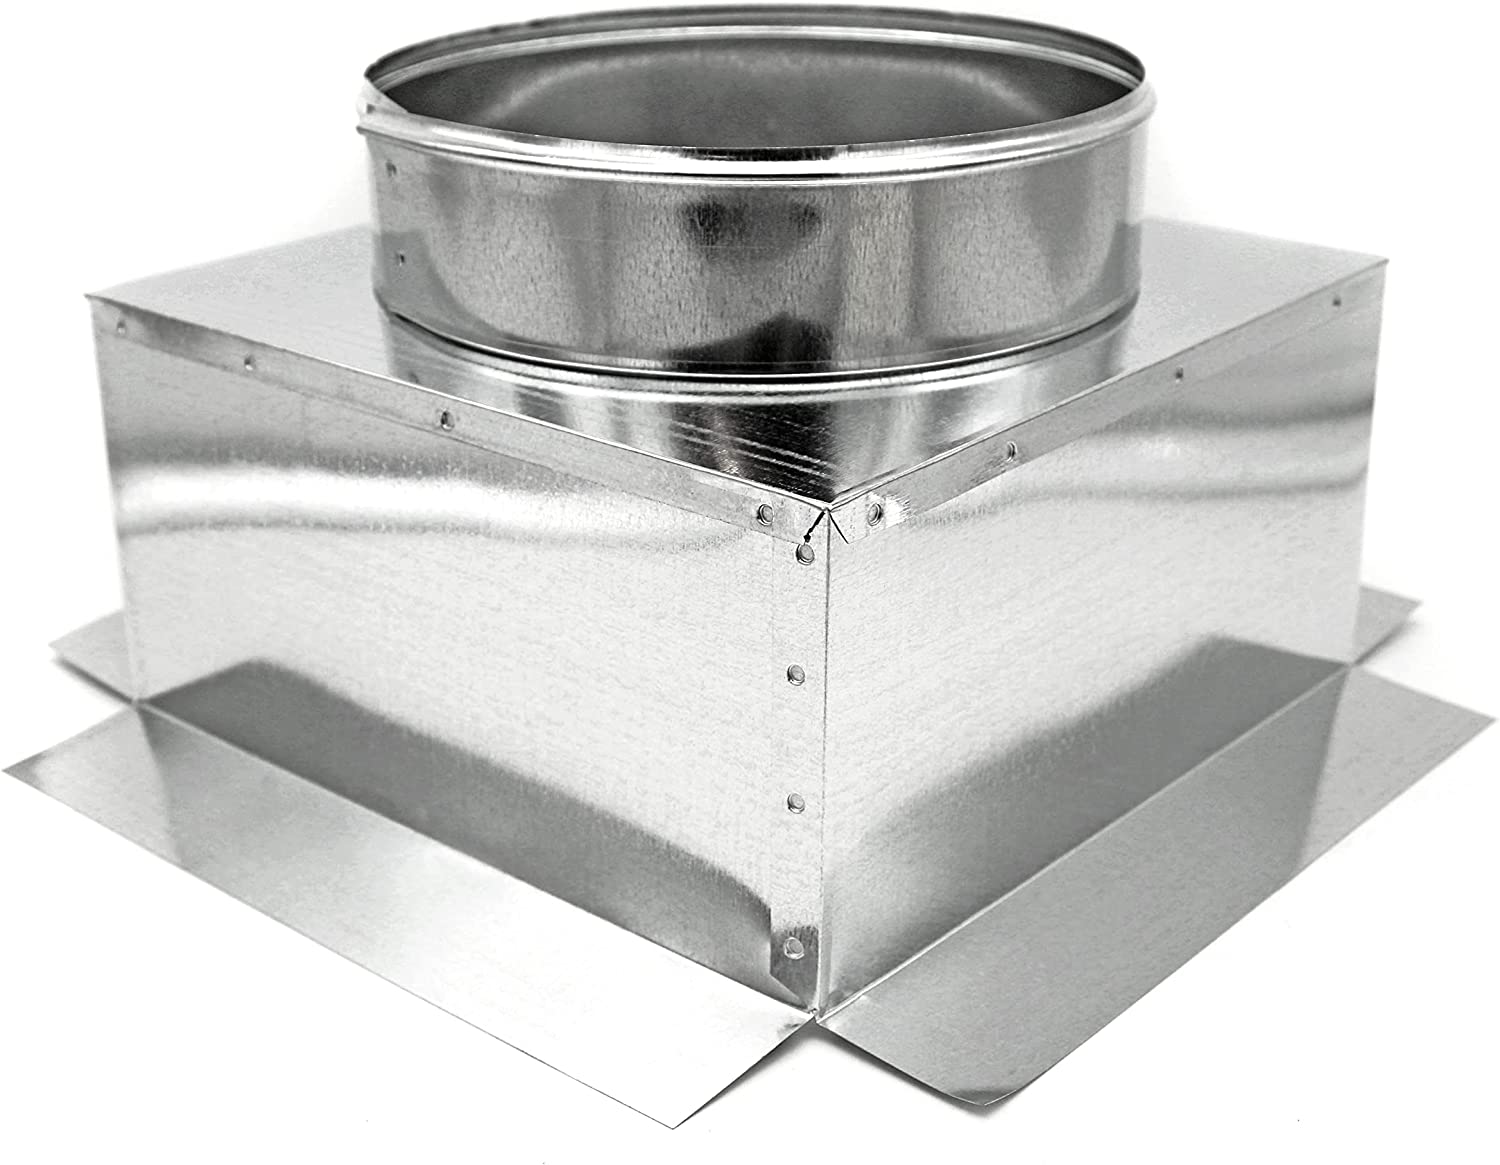 HVAC Plenum Ceiling Box | Top Ceiling Box | 10" X 10" X 8" Galvanized Steel Metal Ceiling Box is Compatible with Duct 8"